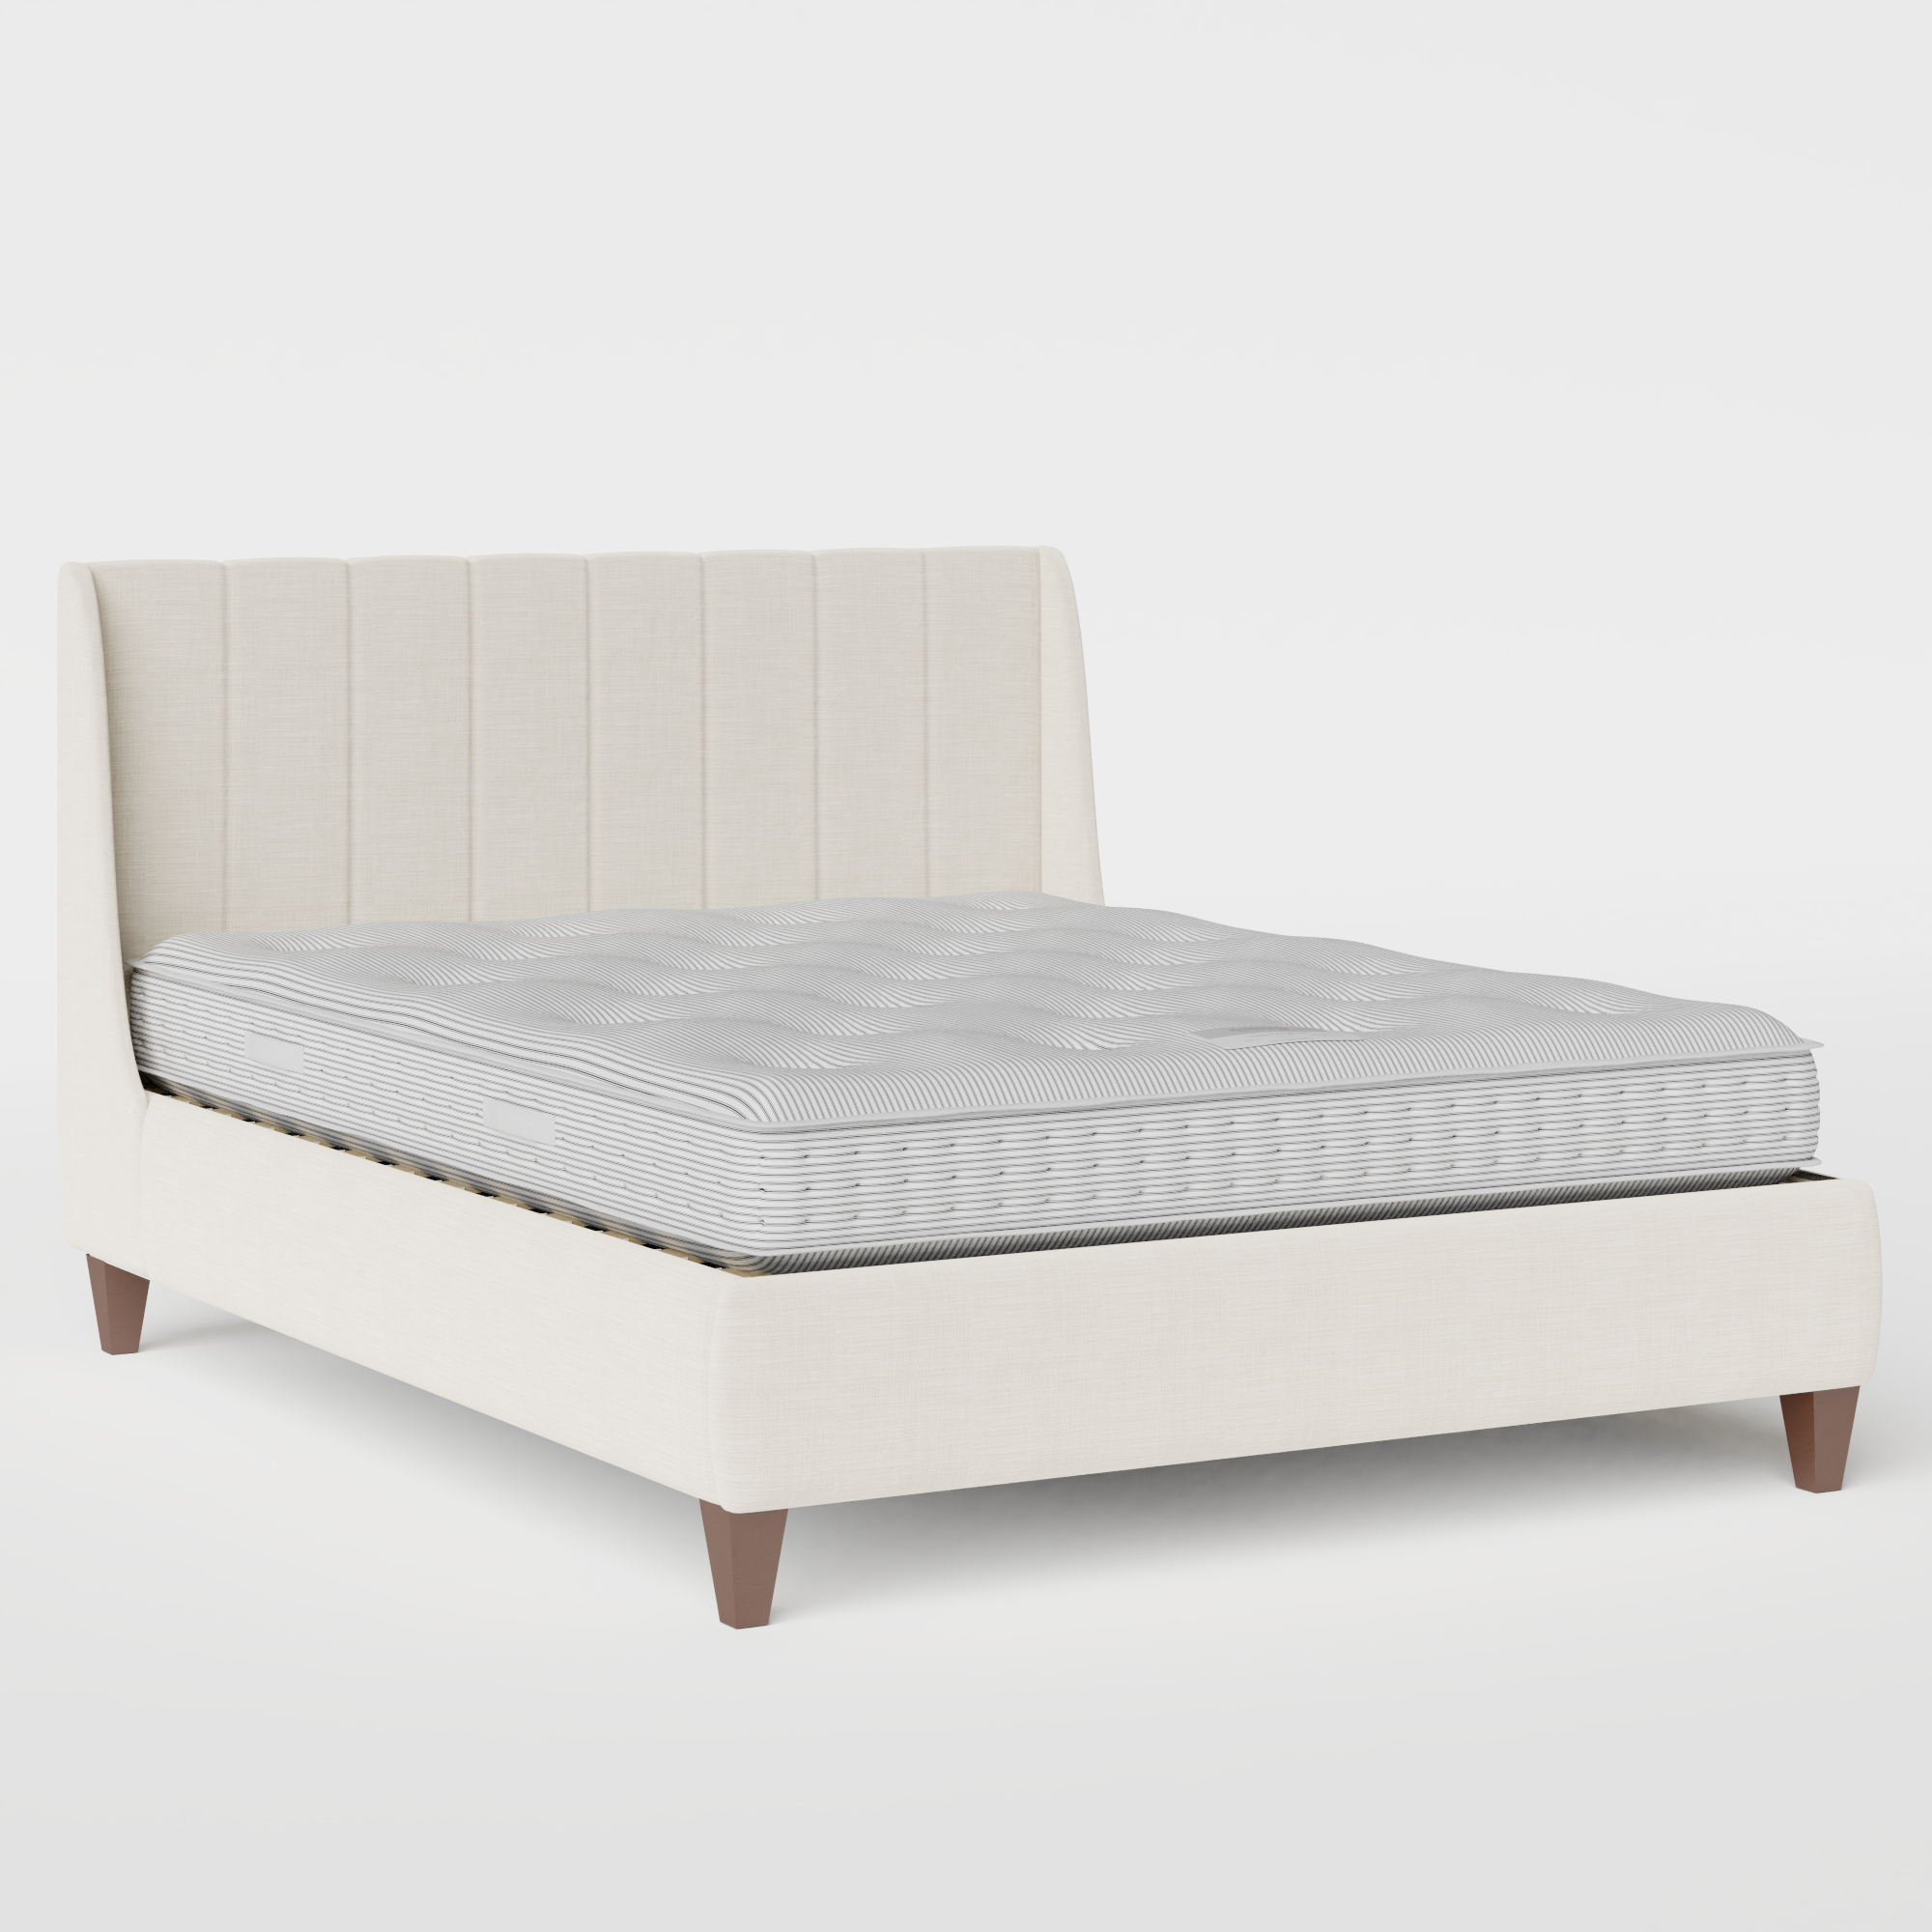 Sunderland Pleated upholstered bed in mist fabric